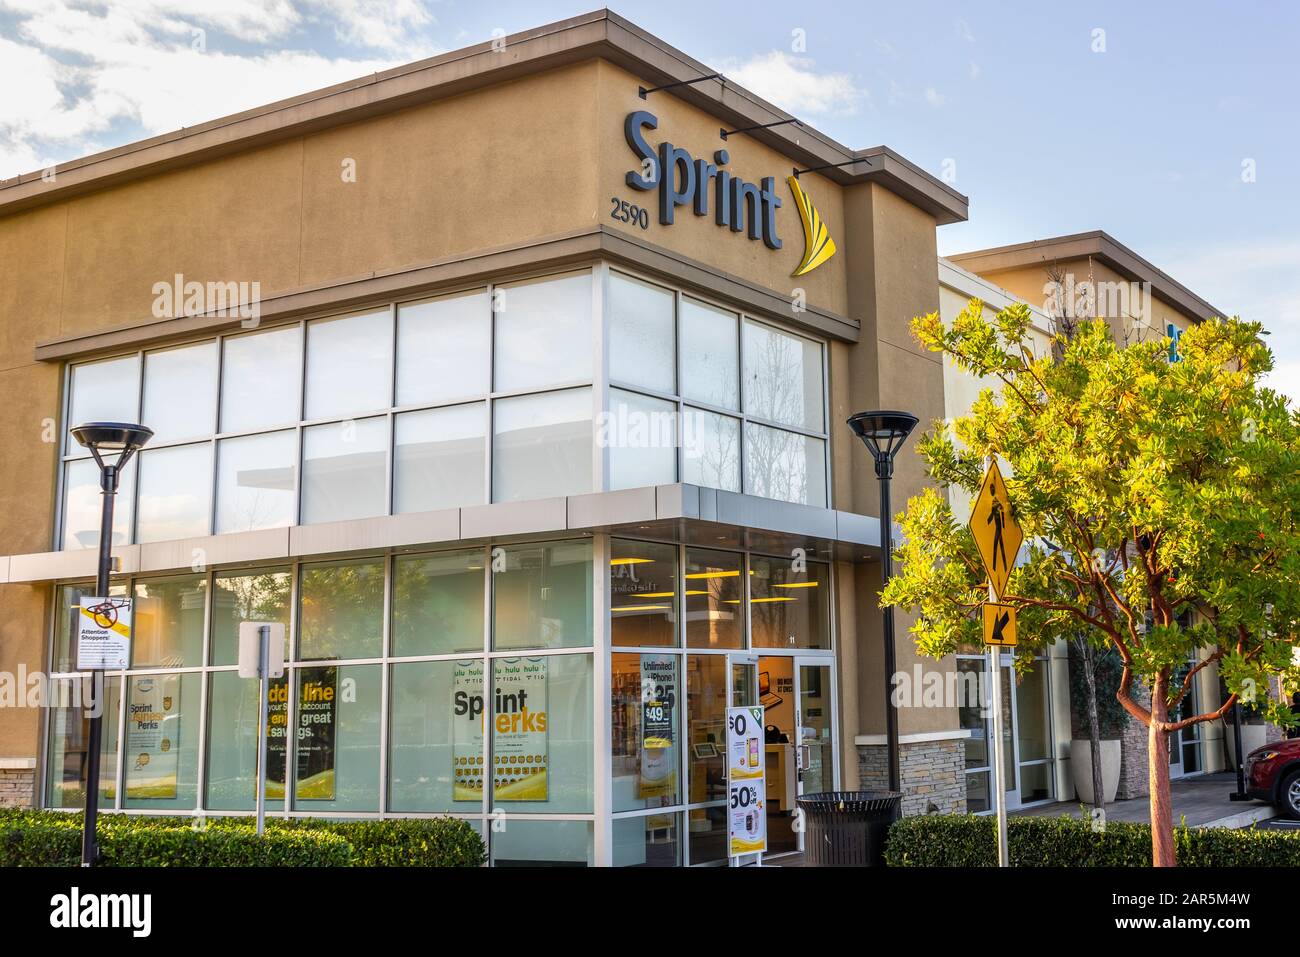 Jan 24, 2020 Mountain View / CA / USA - Sprint store entrance; Sprint Corporation is an American telecommunications company that provides wireless ser Stock Photo